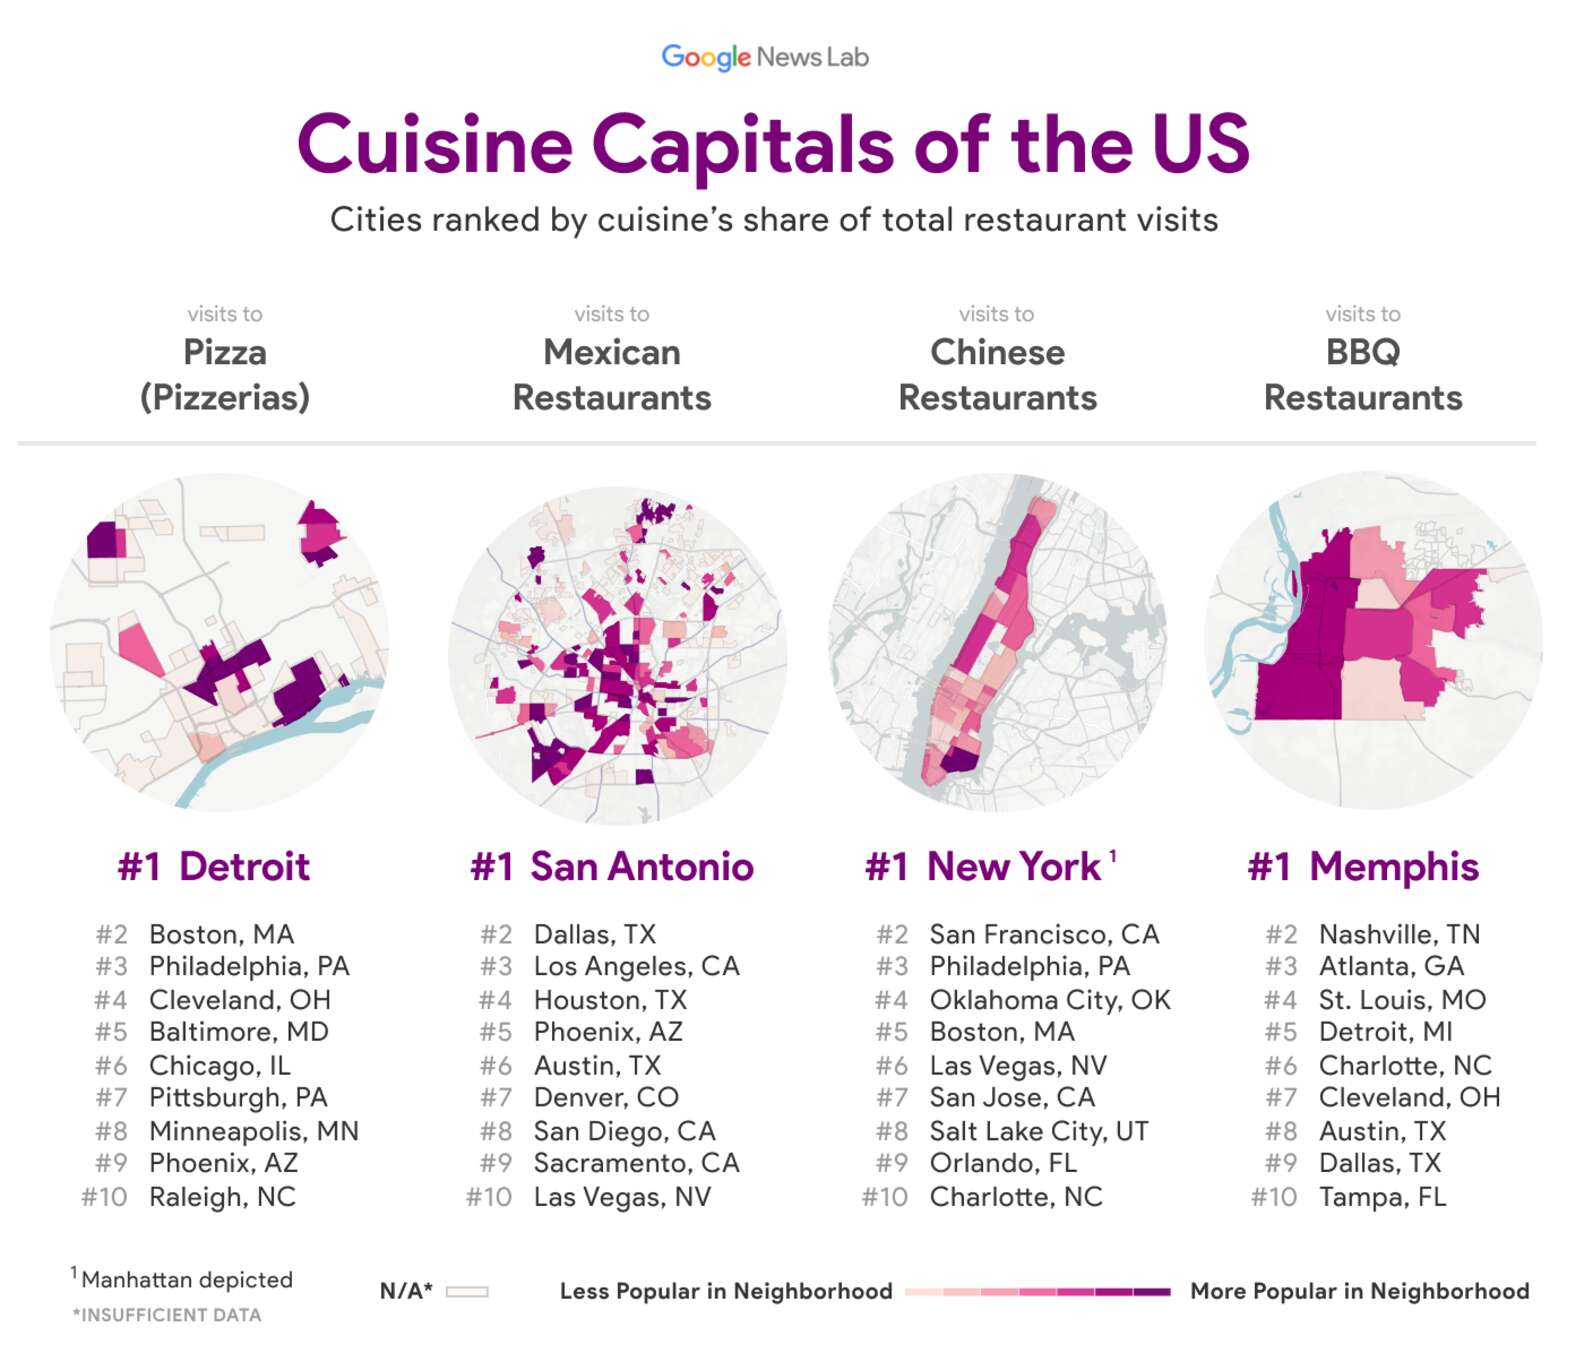 This map is based on restaurant visits in that particular city.